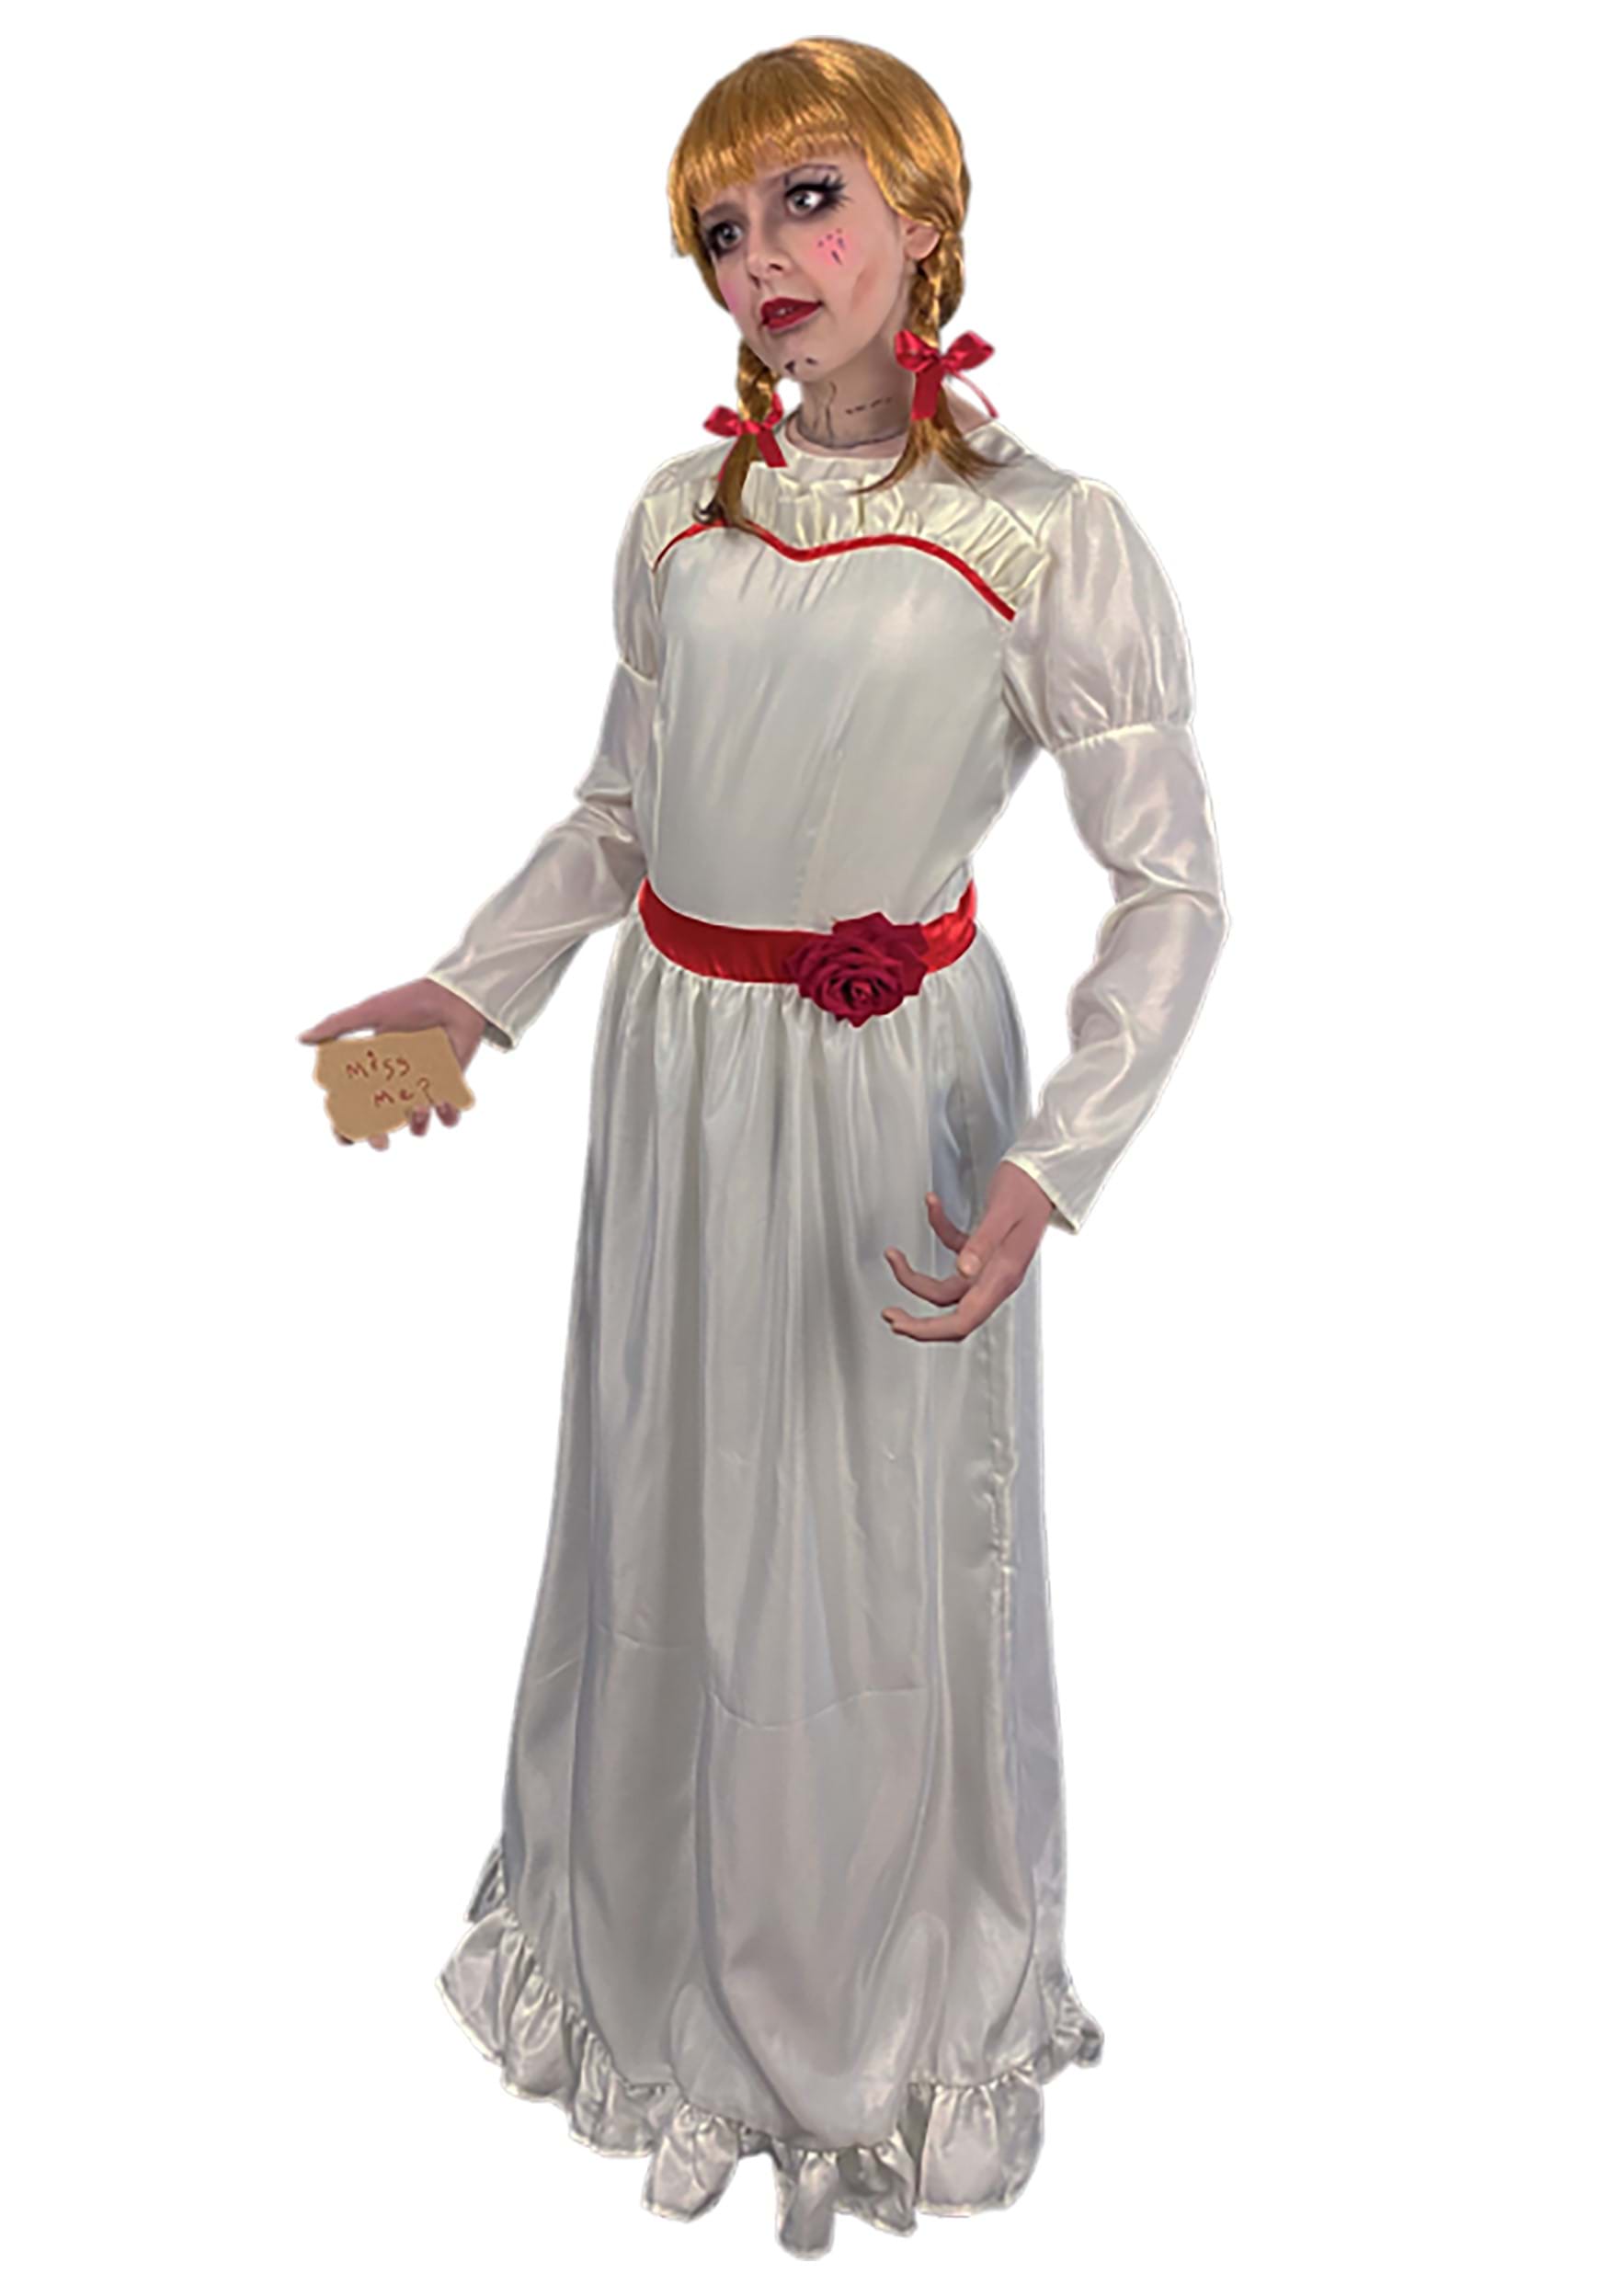 Photos - Fancy Dress Trick or Treat Studios The Conjuring Annabelle Women's Costume Dress | Hor